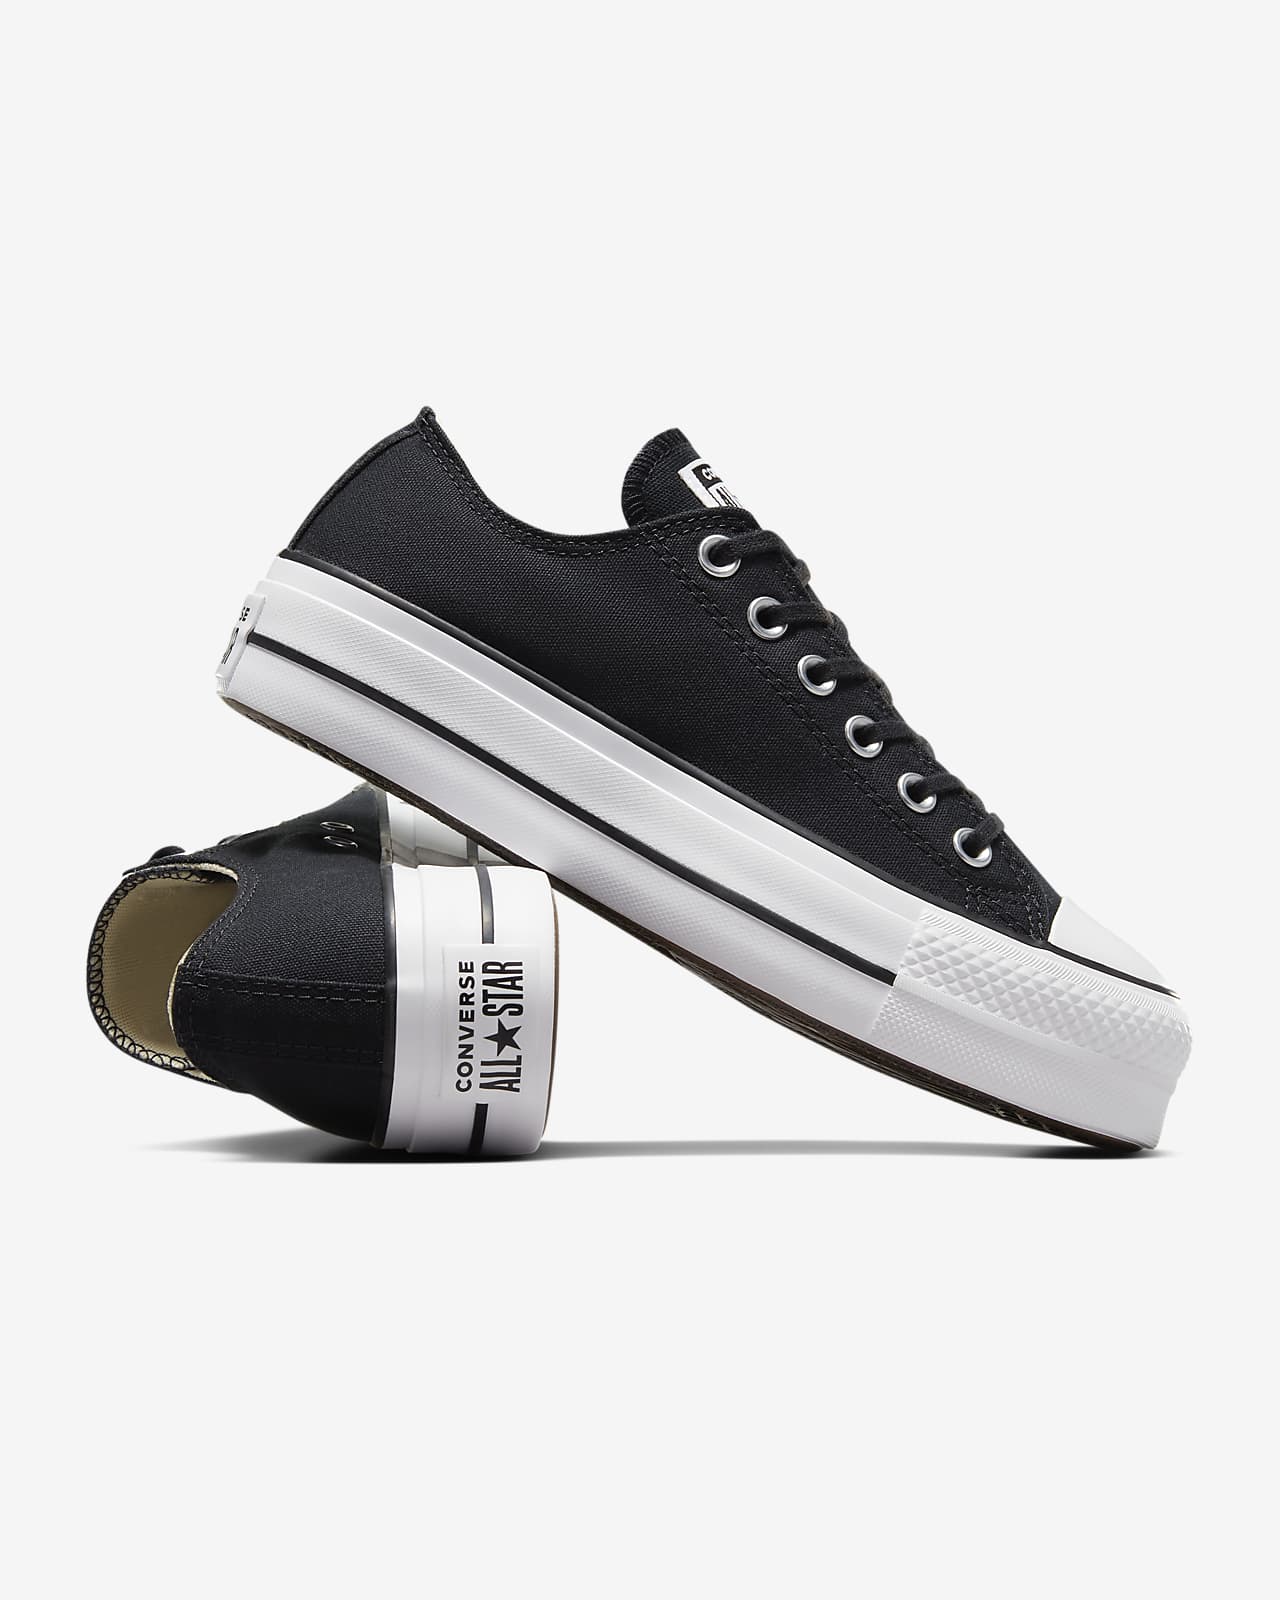 Chuck Taylor All Star Leather Unisex Low Top Shoe.